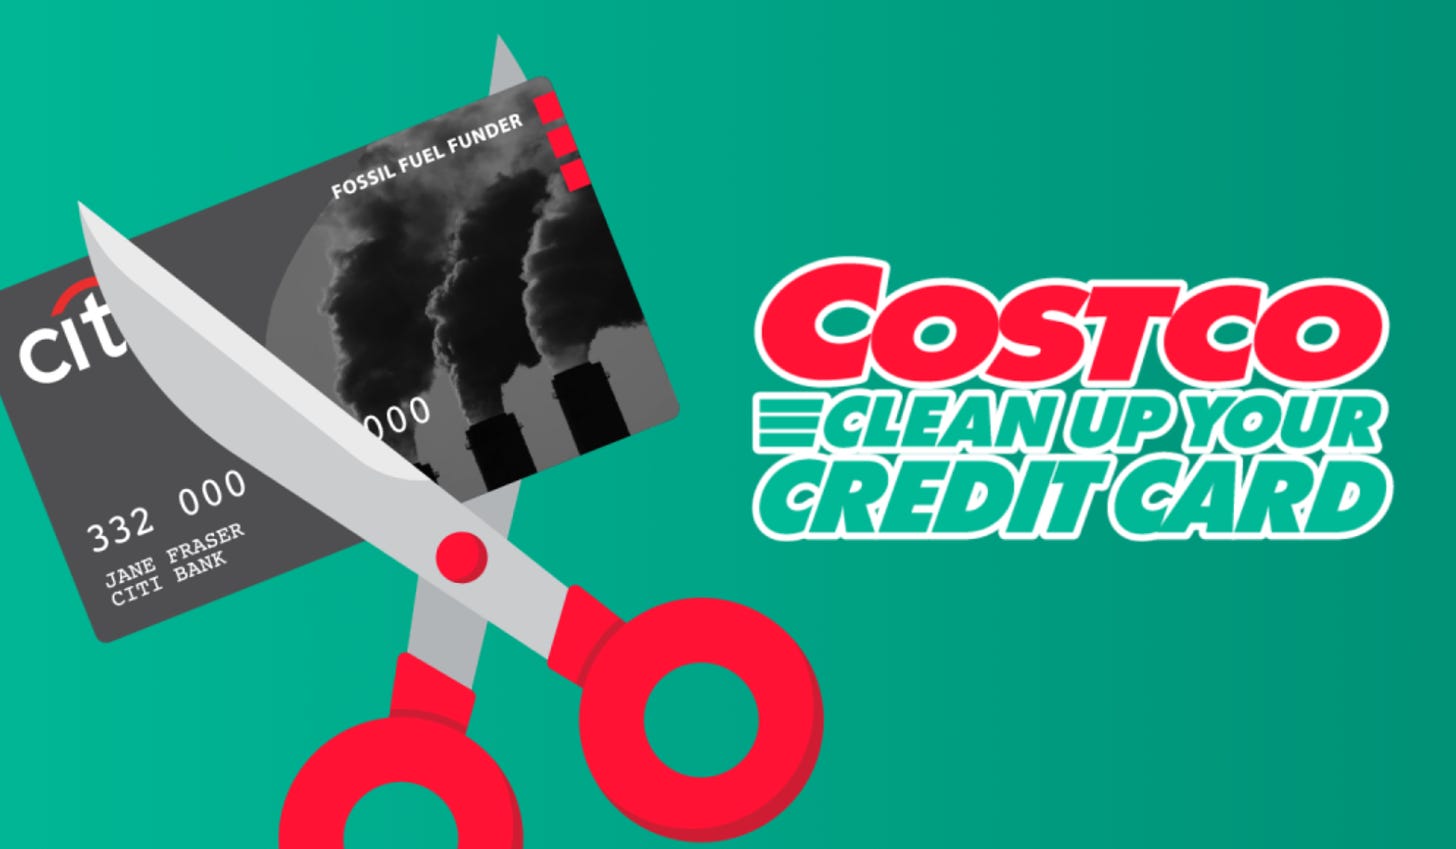 cartoon scissors cutting up Costco credit card, wording "Costco: clean up your credit card"